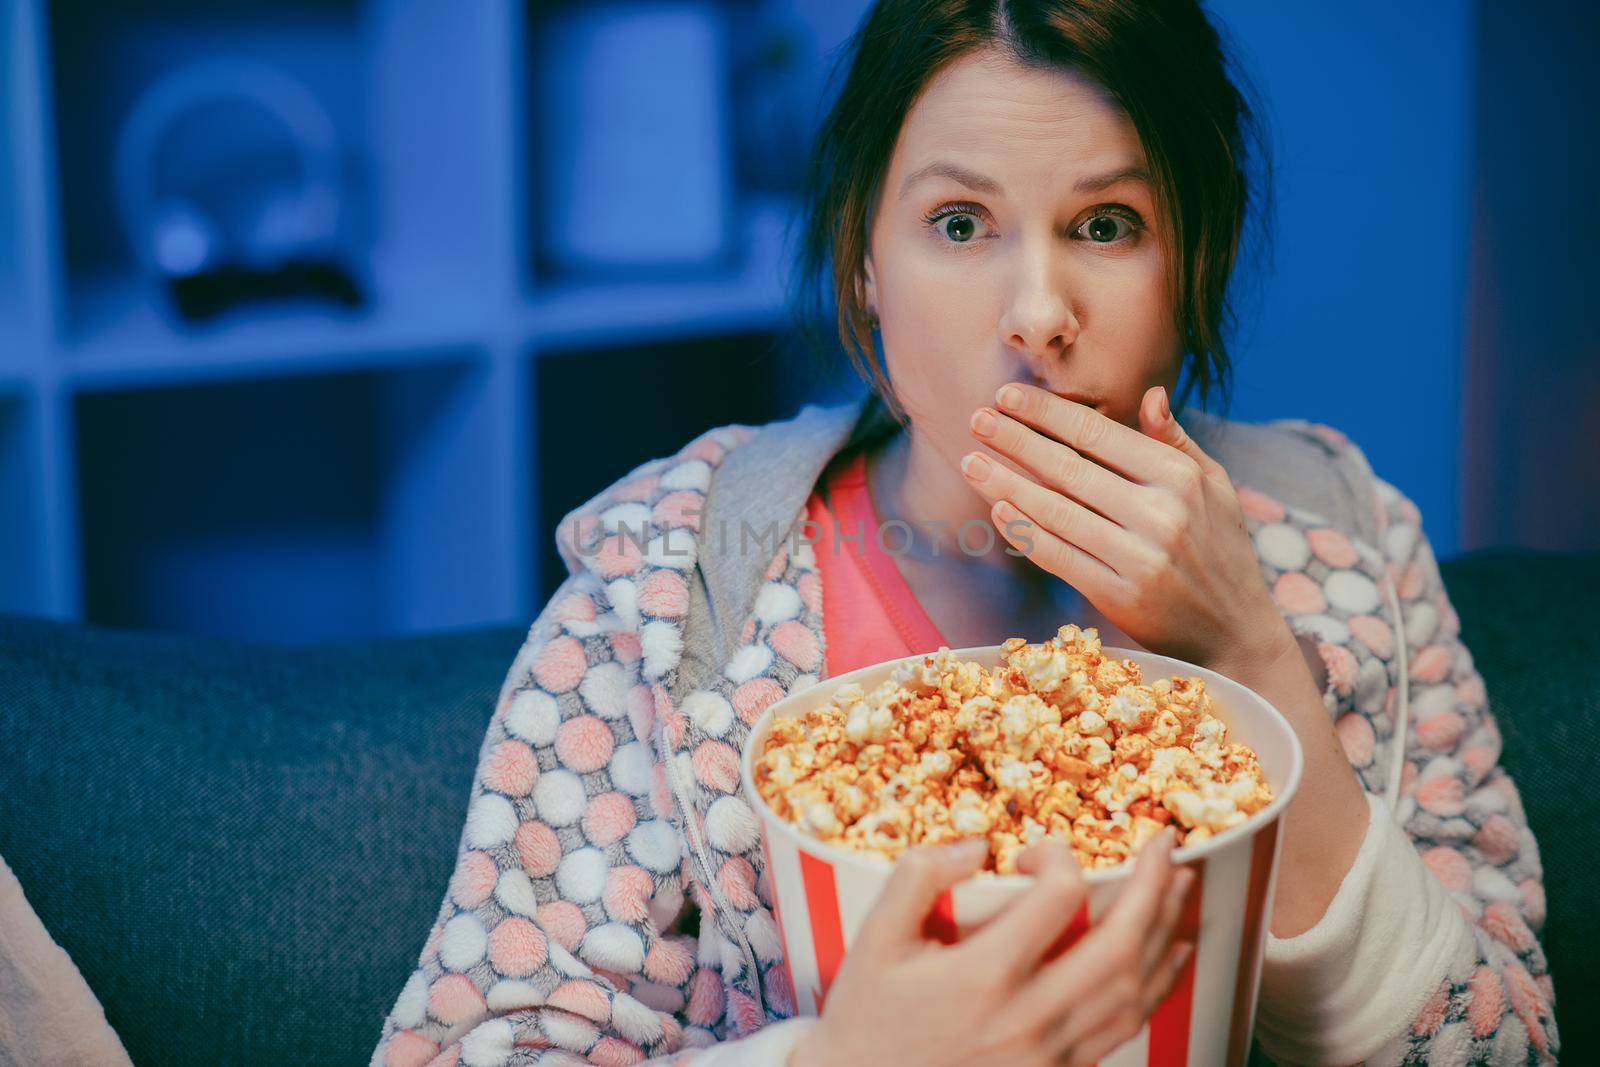 Woman with popcorn sitting on the sofa watching something scary while eating popcorn and being afraid. Inside